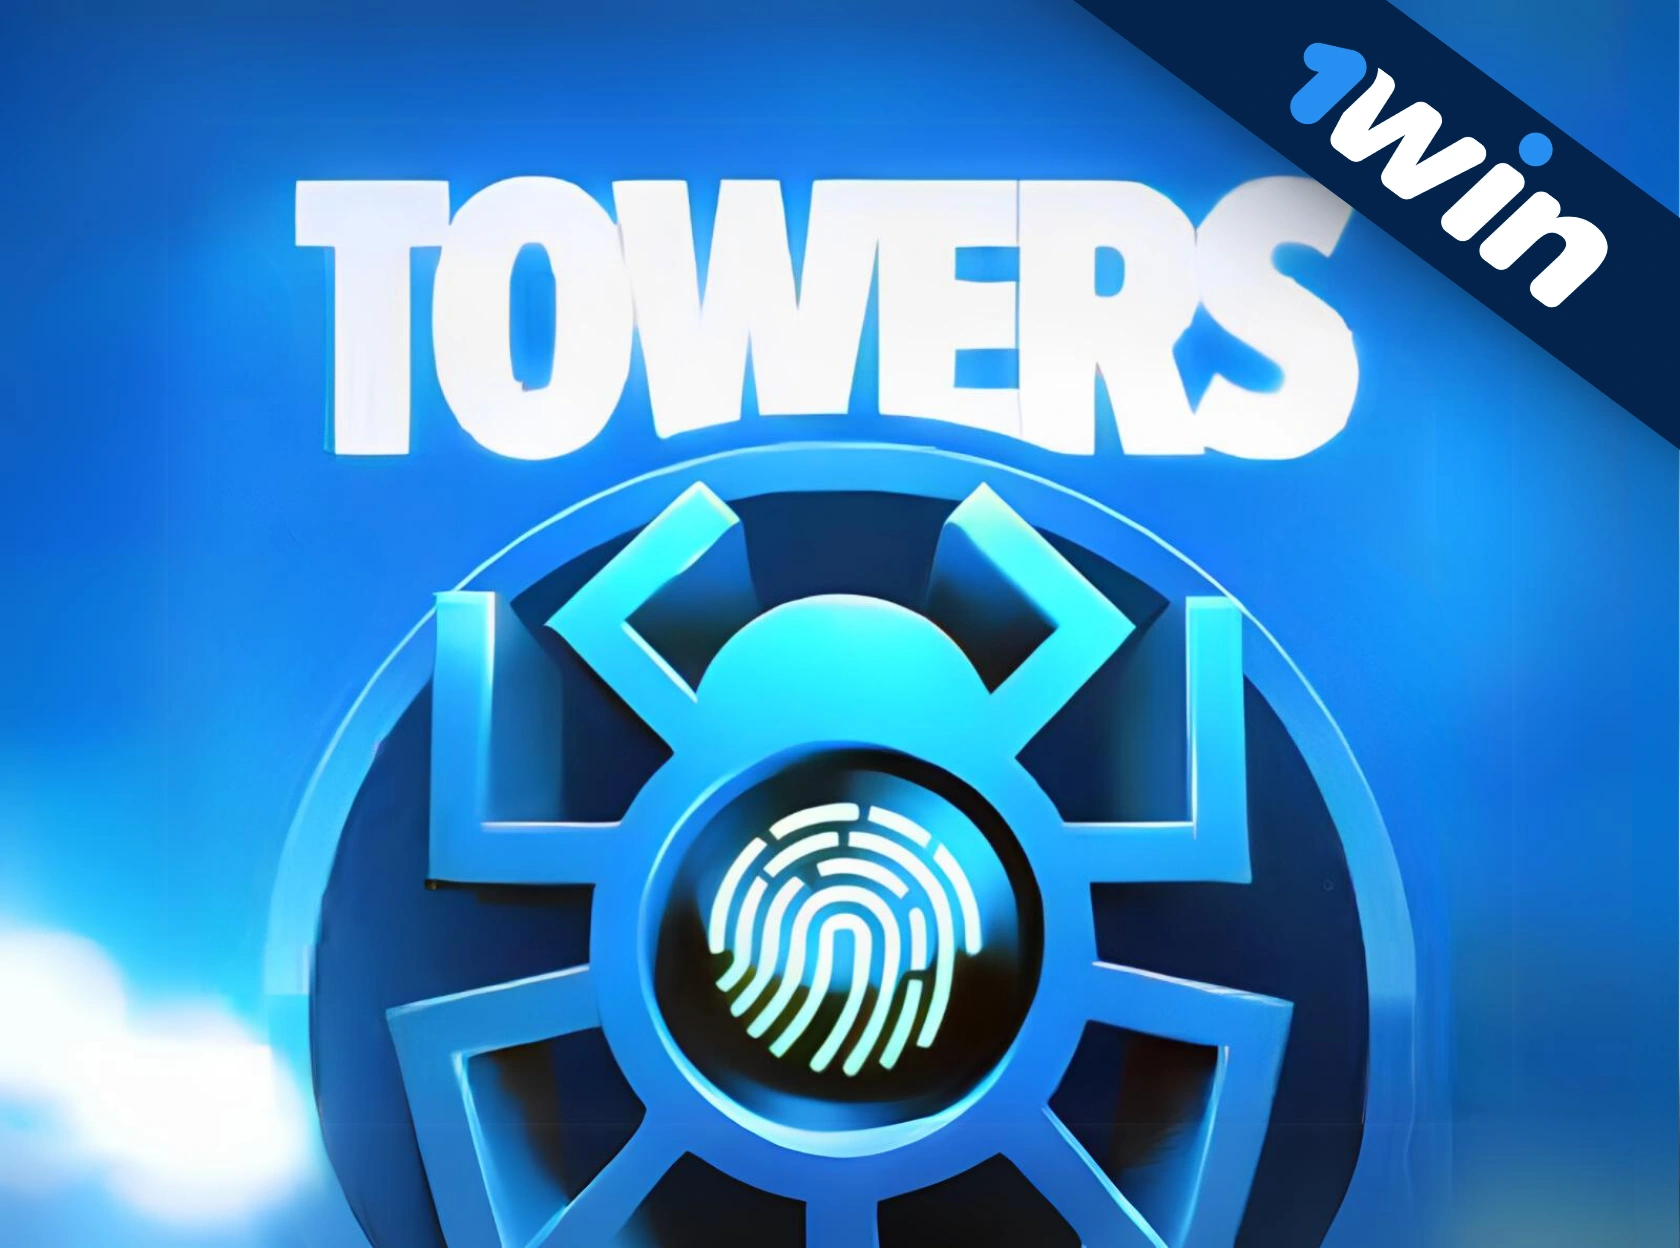 Towers 1win is a new exclusive game!